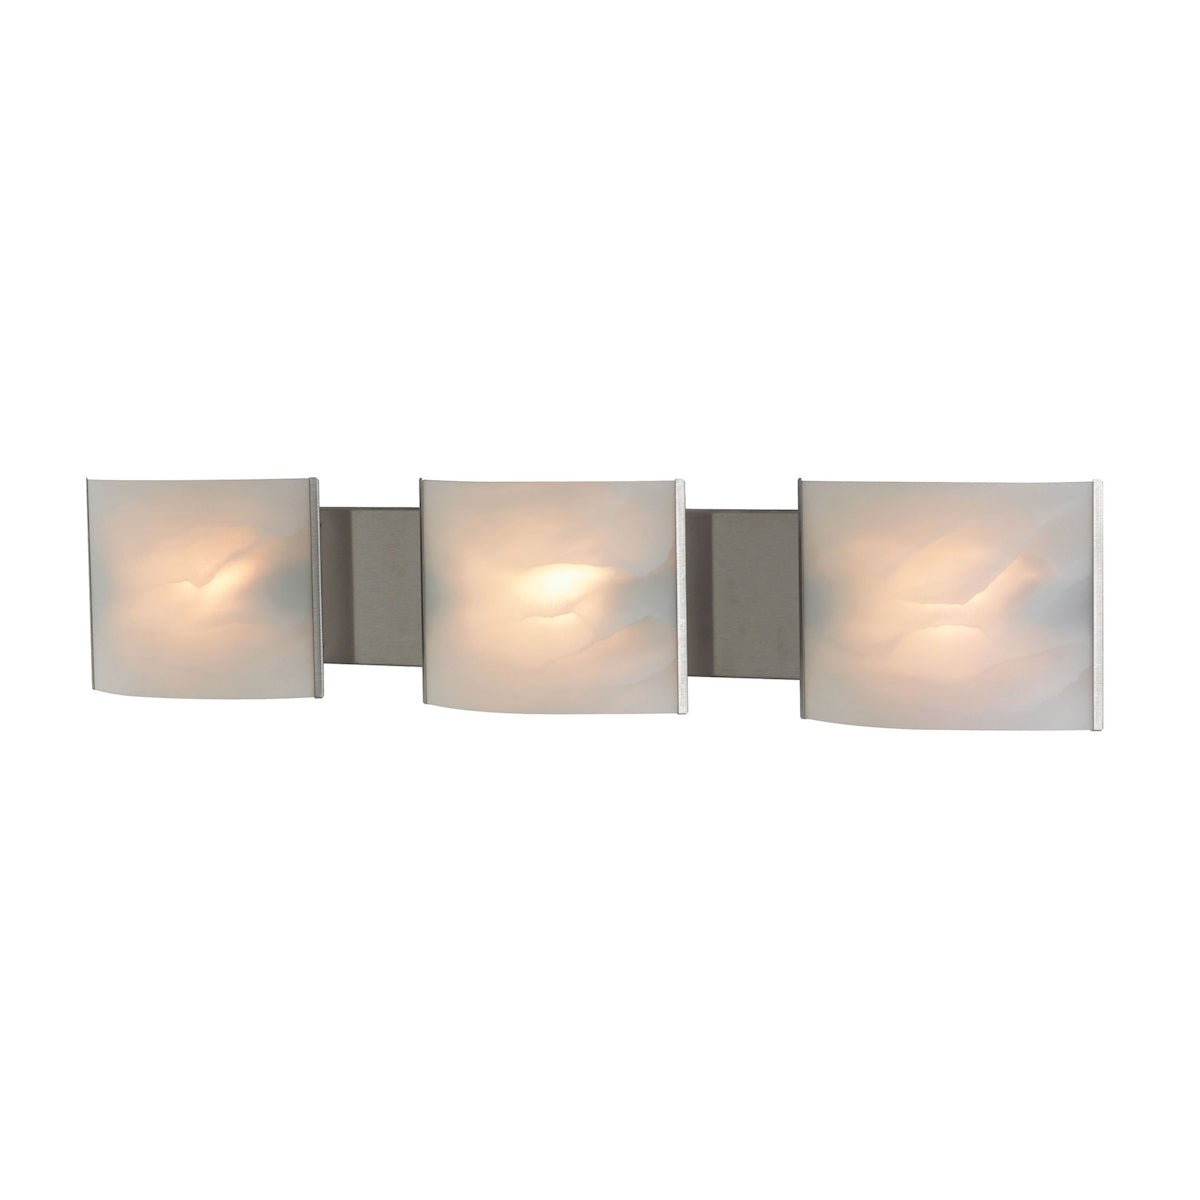 ELK Lighting BV713-6-16 Pannelli 3-Light Vanity Sconce in Stainless Steel with Hand-formed White Alabaster Glass